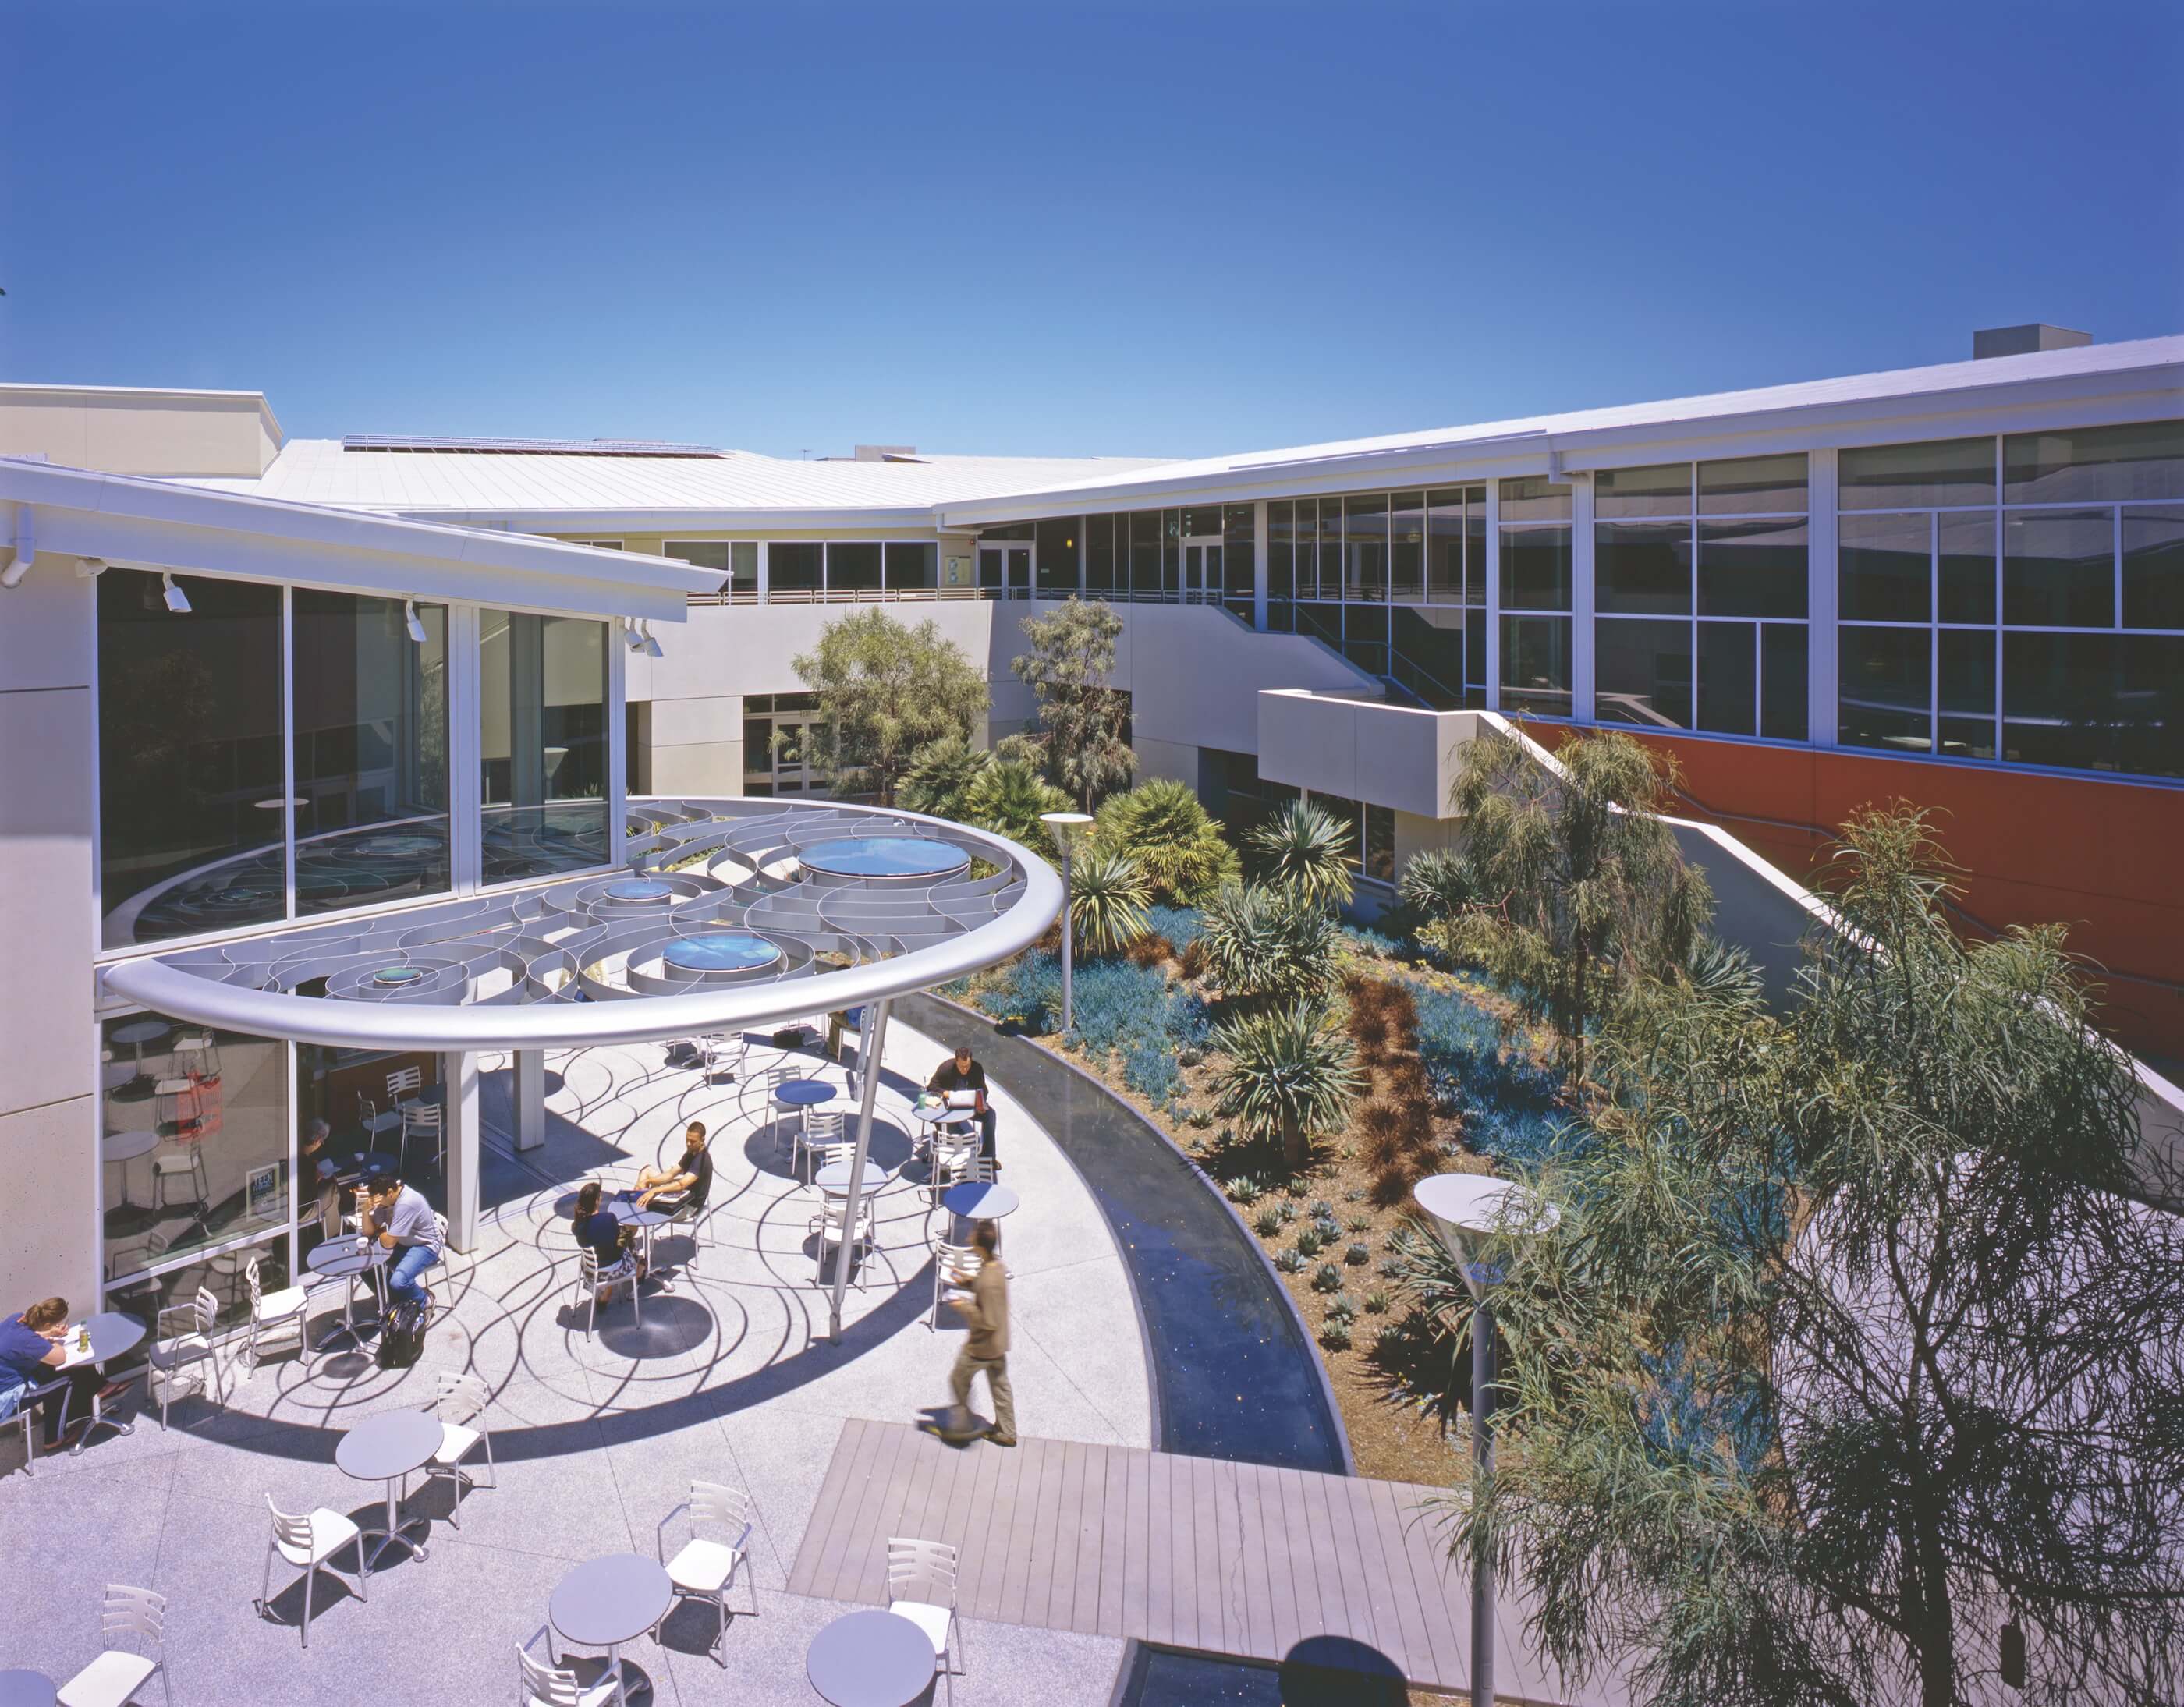 view of a landscaped courtyard at a library designed by pamela burton